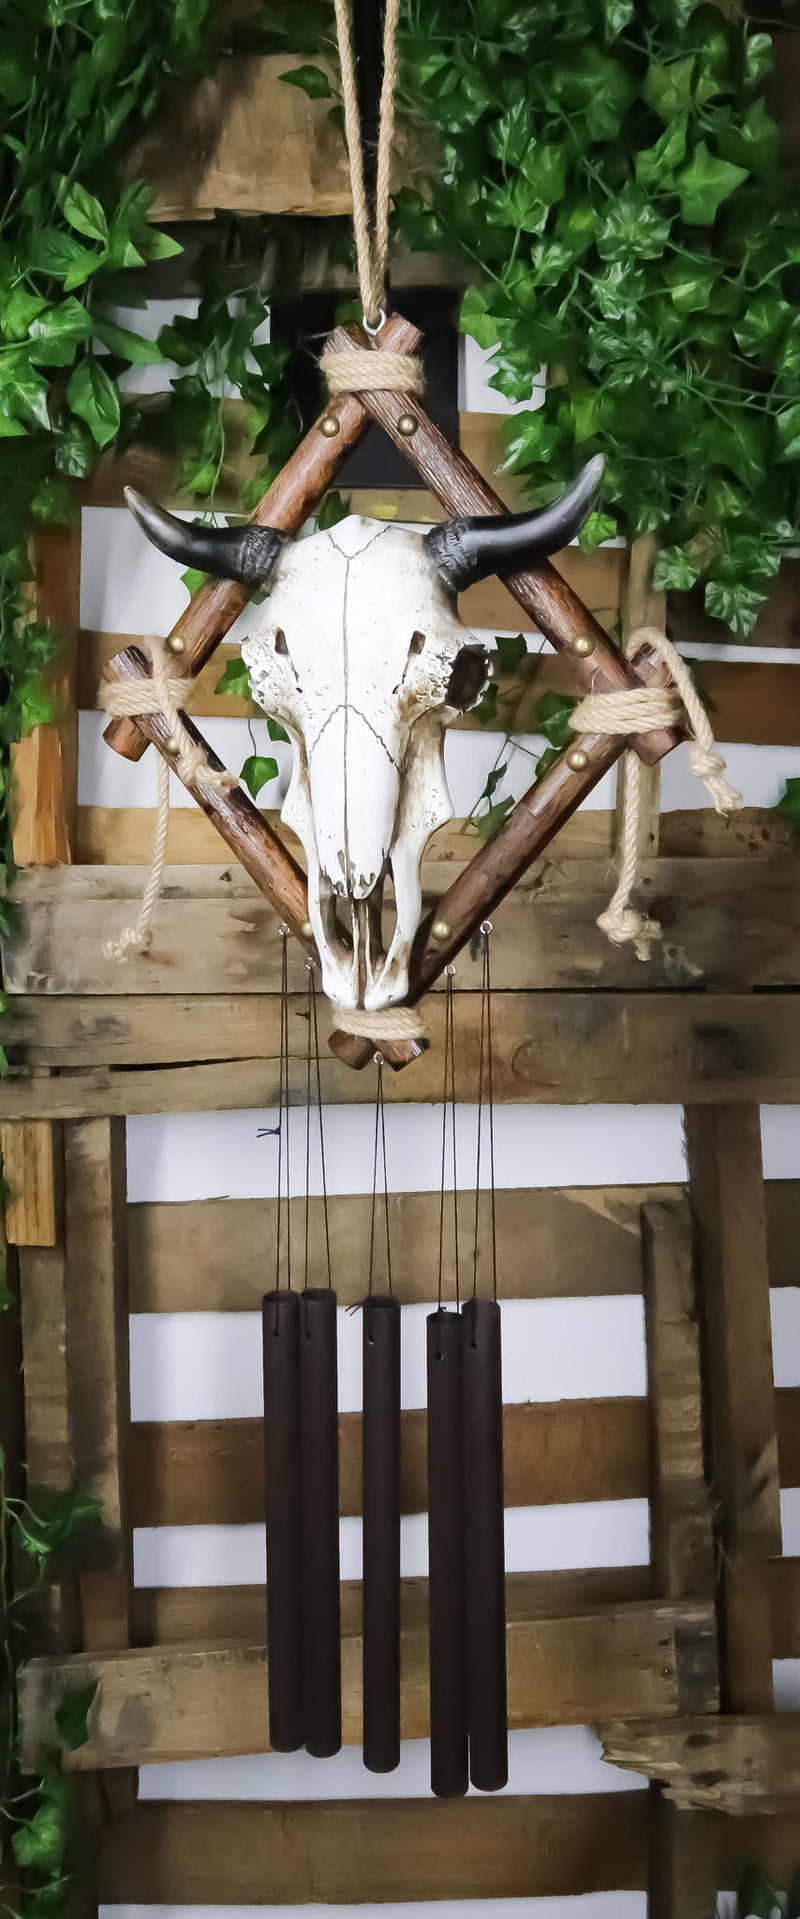 Country Rustic Western Bison Bull Skull On Branchwood Decorative Wind Chime